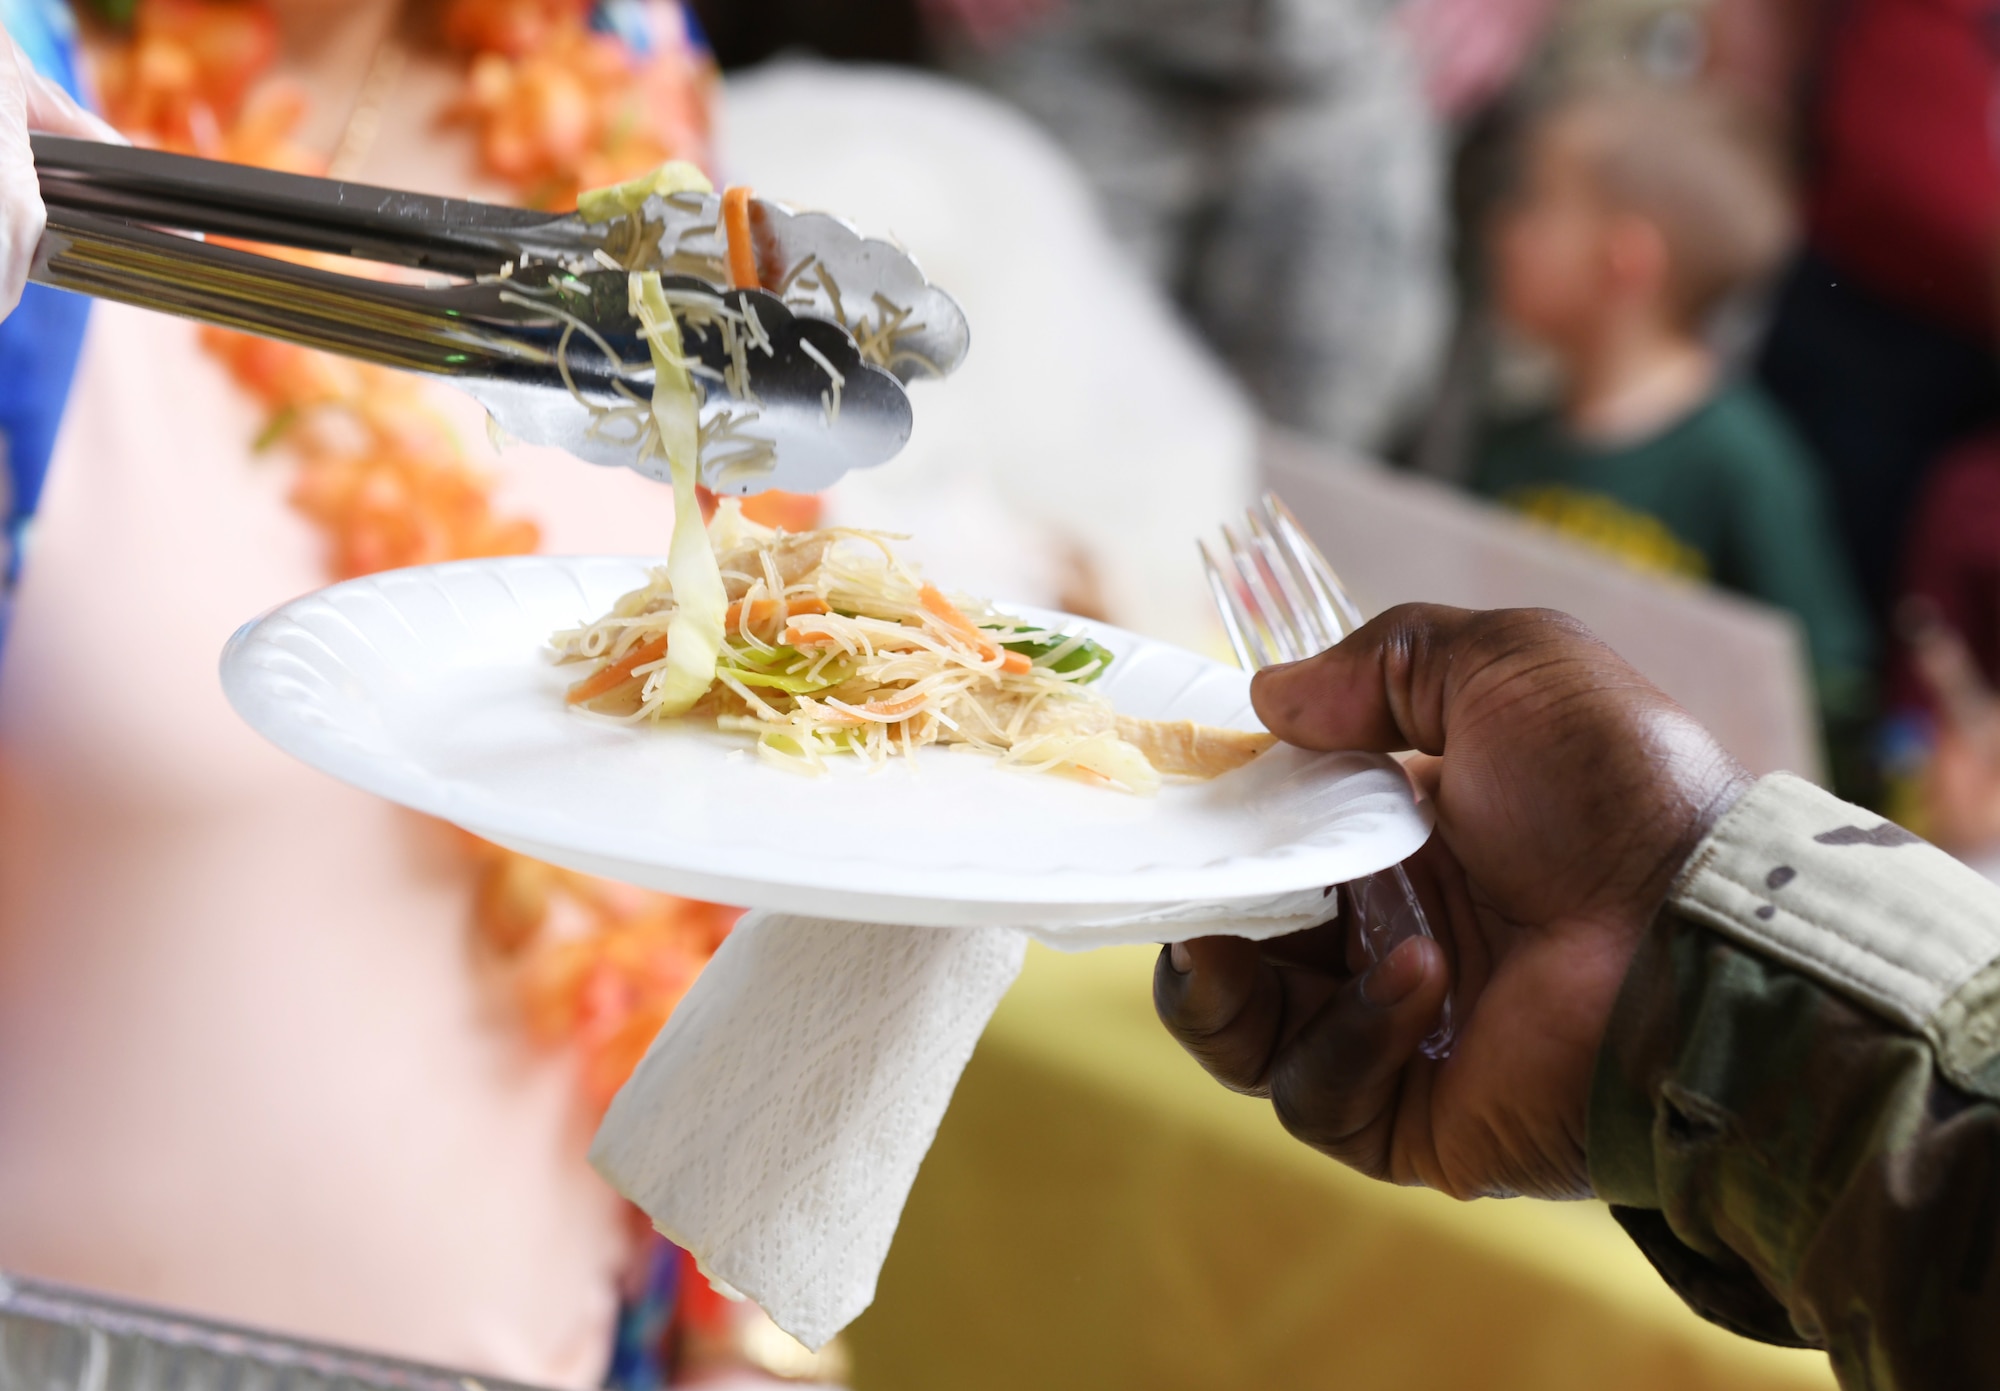 Tech. Sgt. Jermaine Wright, a 28th Munitions Squadron conventional maintenance technician, puts together a plate during a food tasting event on Ellsworth Air Force Base, S.D., May 3, 2019. Volunteers prepared several foods influenced by Asian and Pacific Islander cultures and served them to Airmen and their families. (U.S. Air Force photo by Senior Airman Thomas Karol)